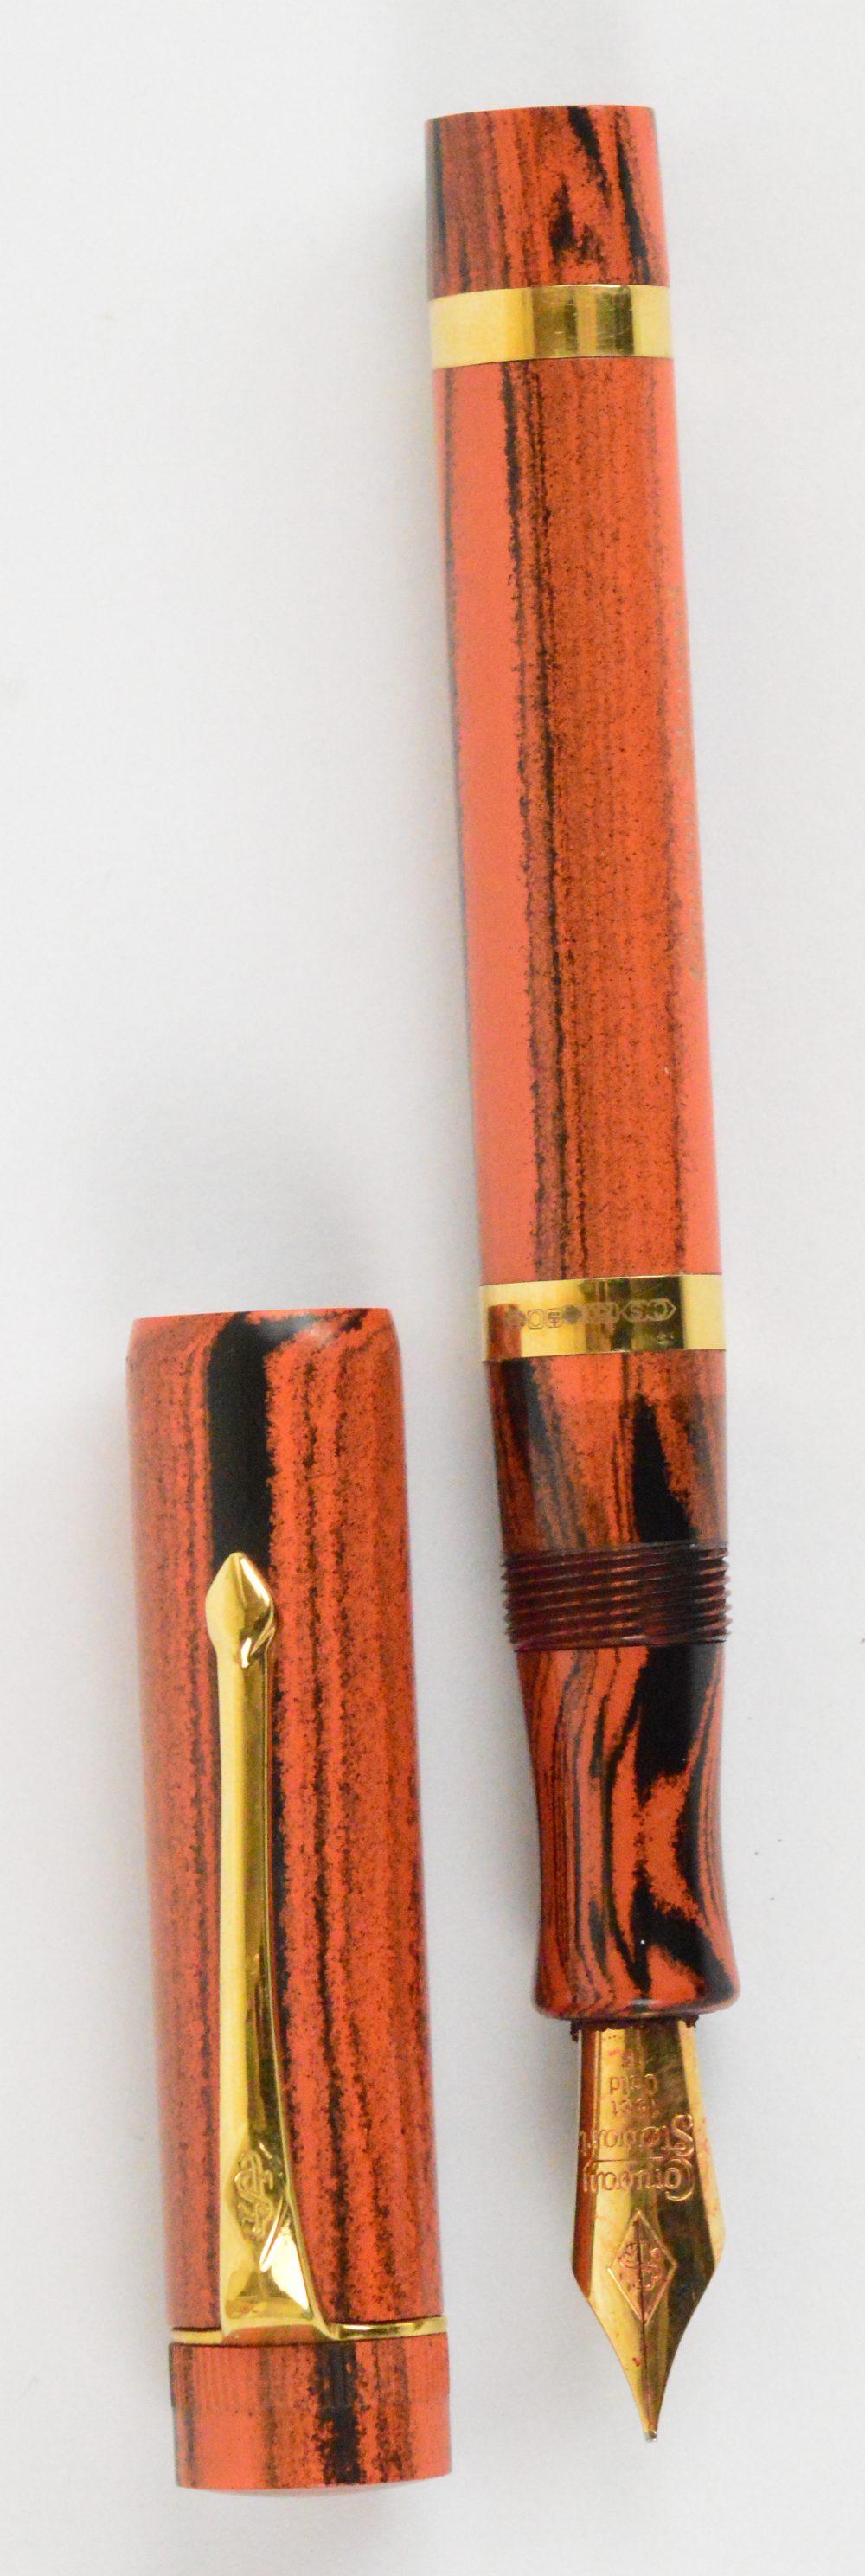 A Conway Stewart "Marlborough Vintage" limited edition fountain pen, - Image 2 of 5